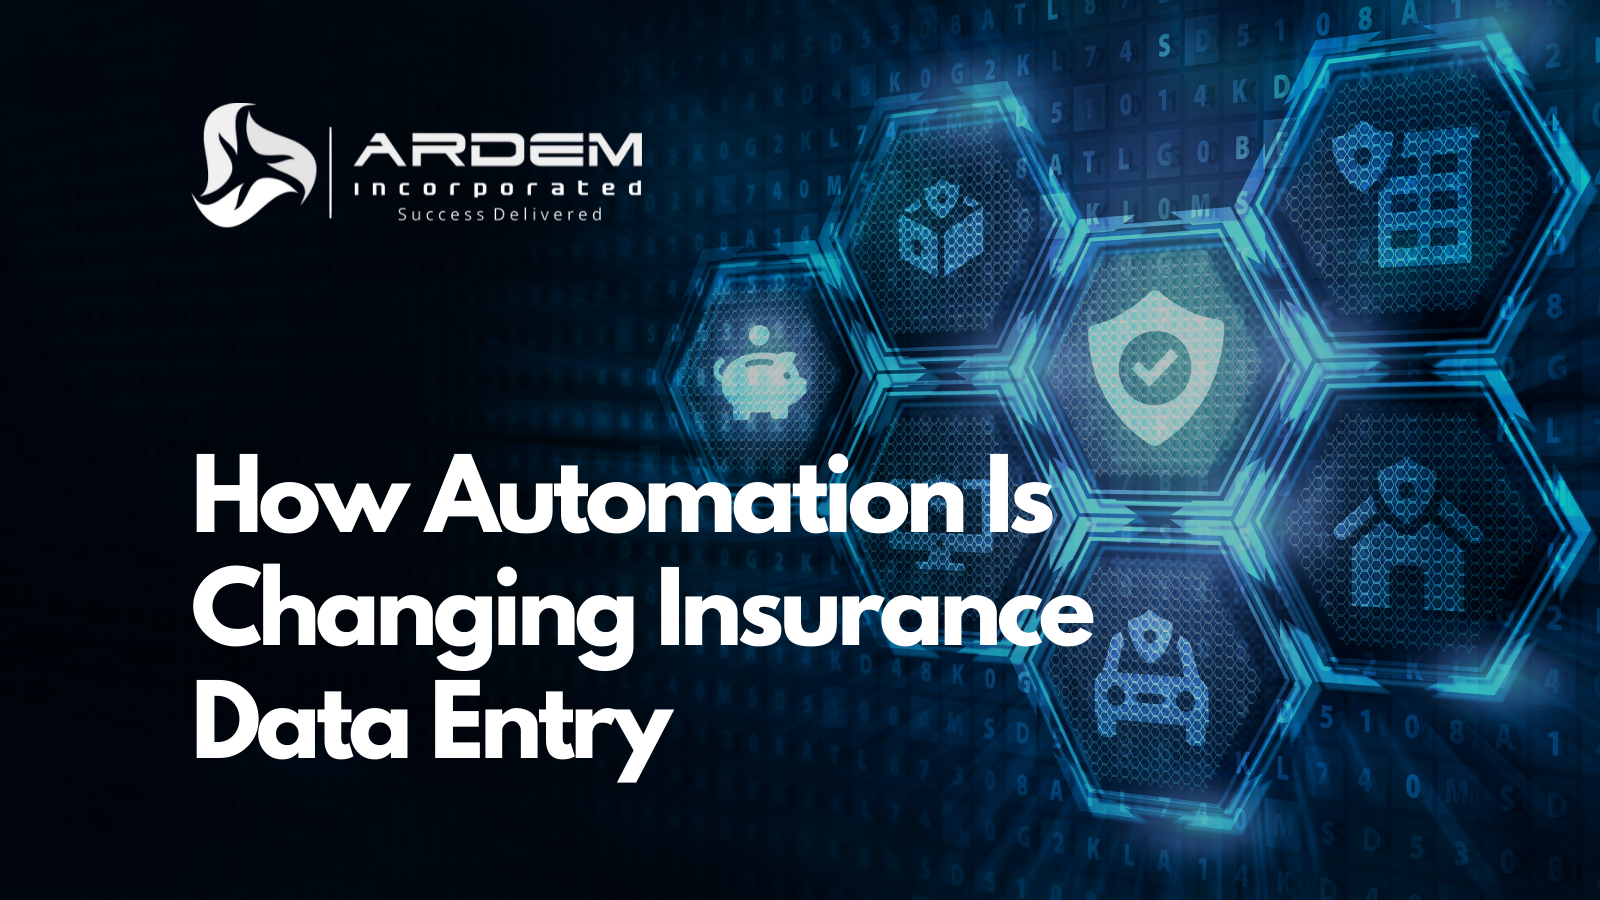 automation insurance outsourcing data entry